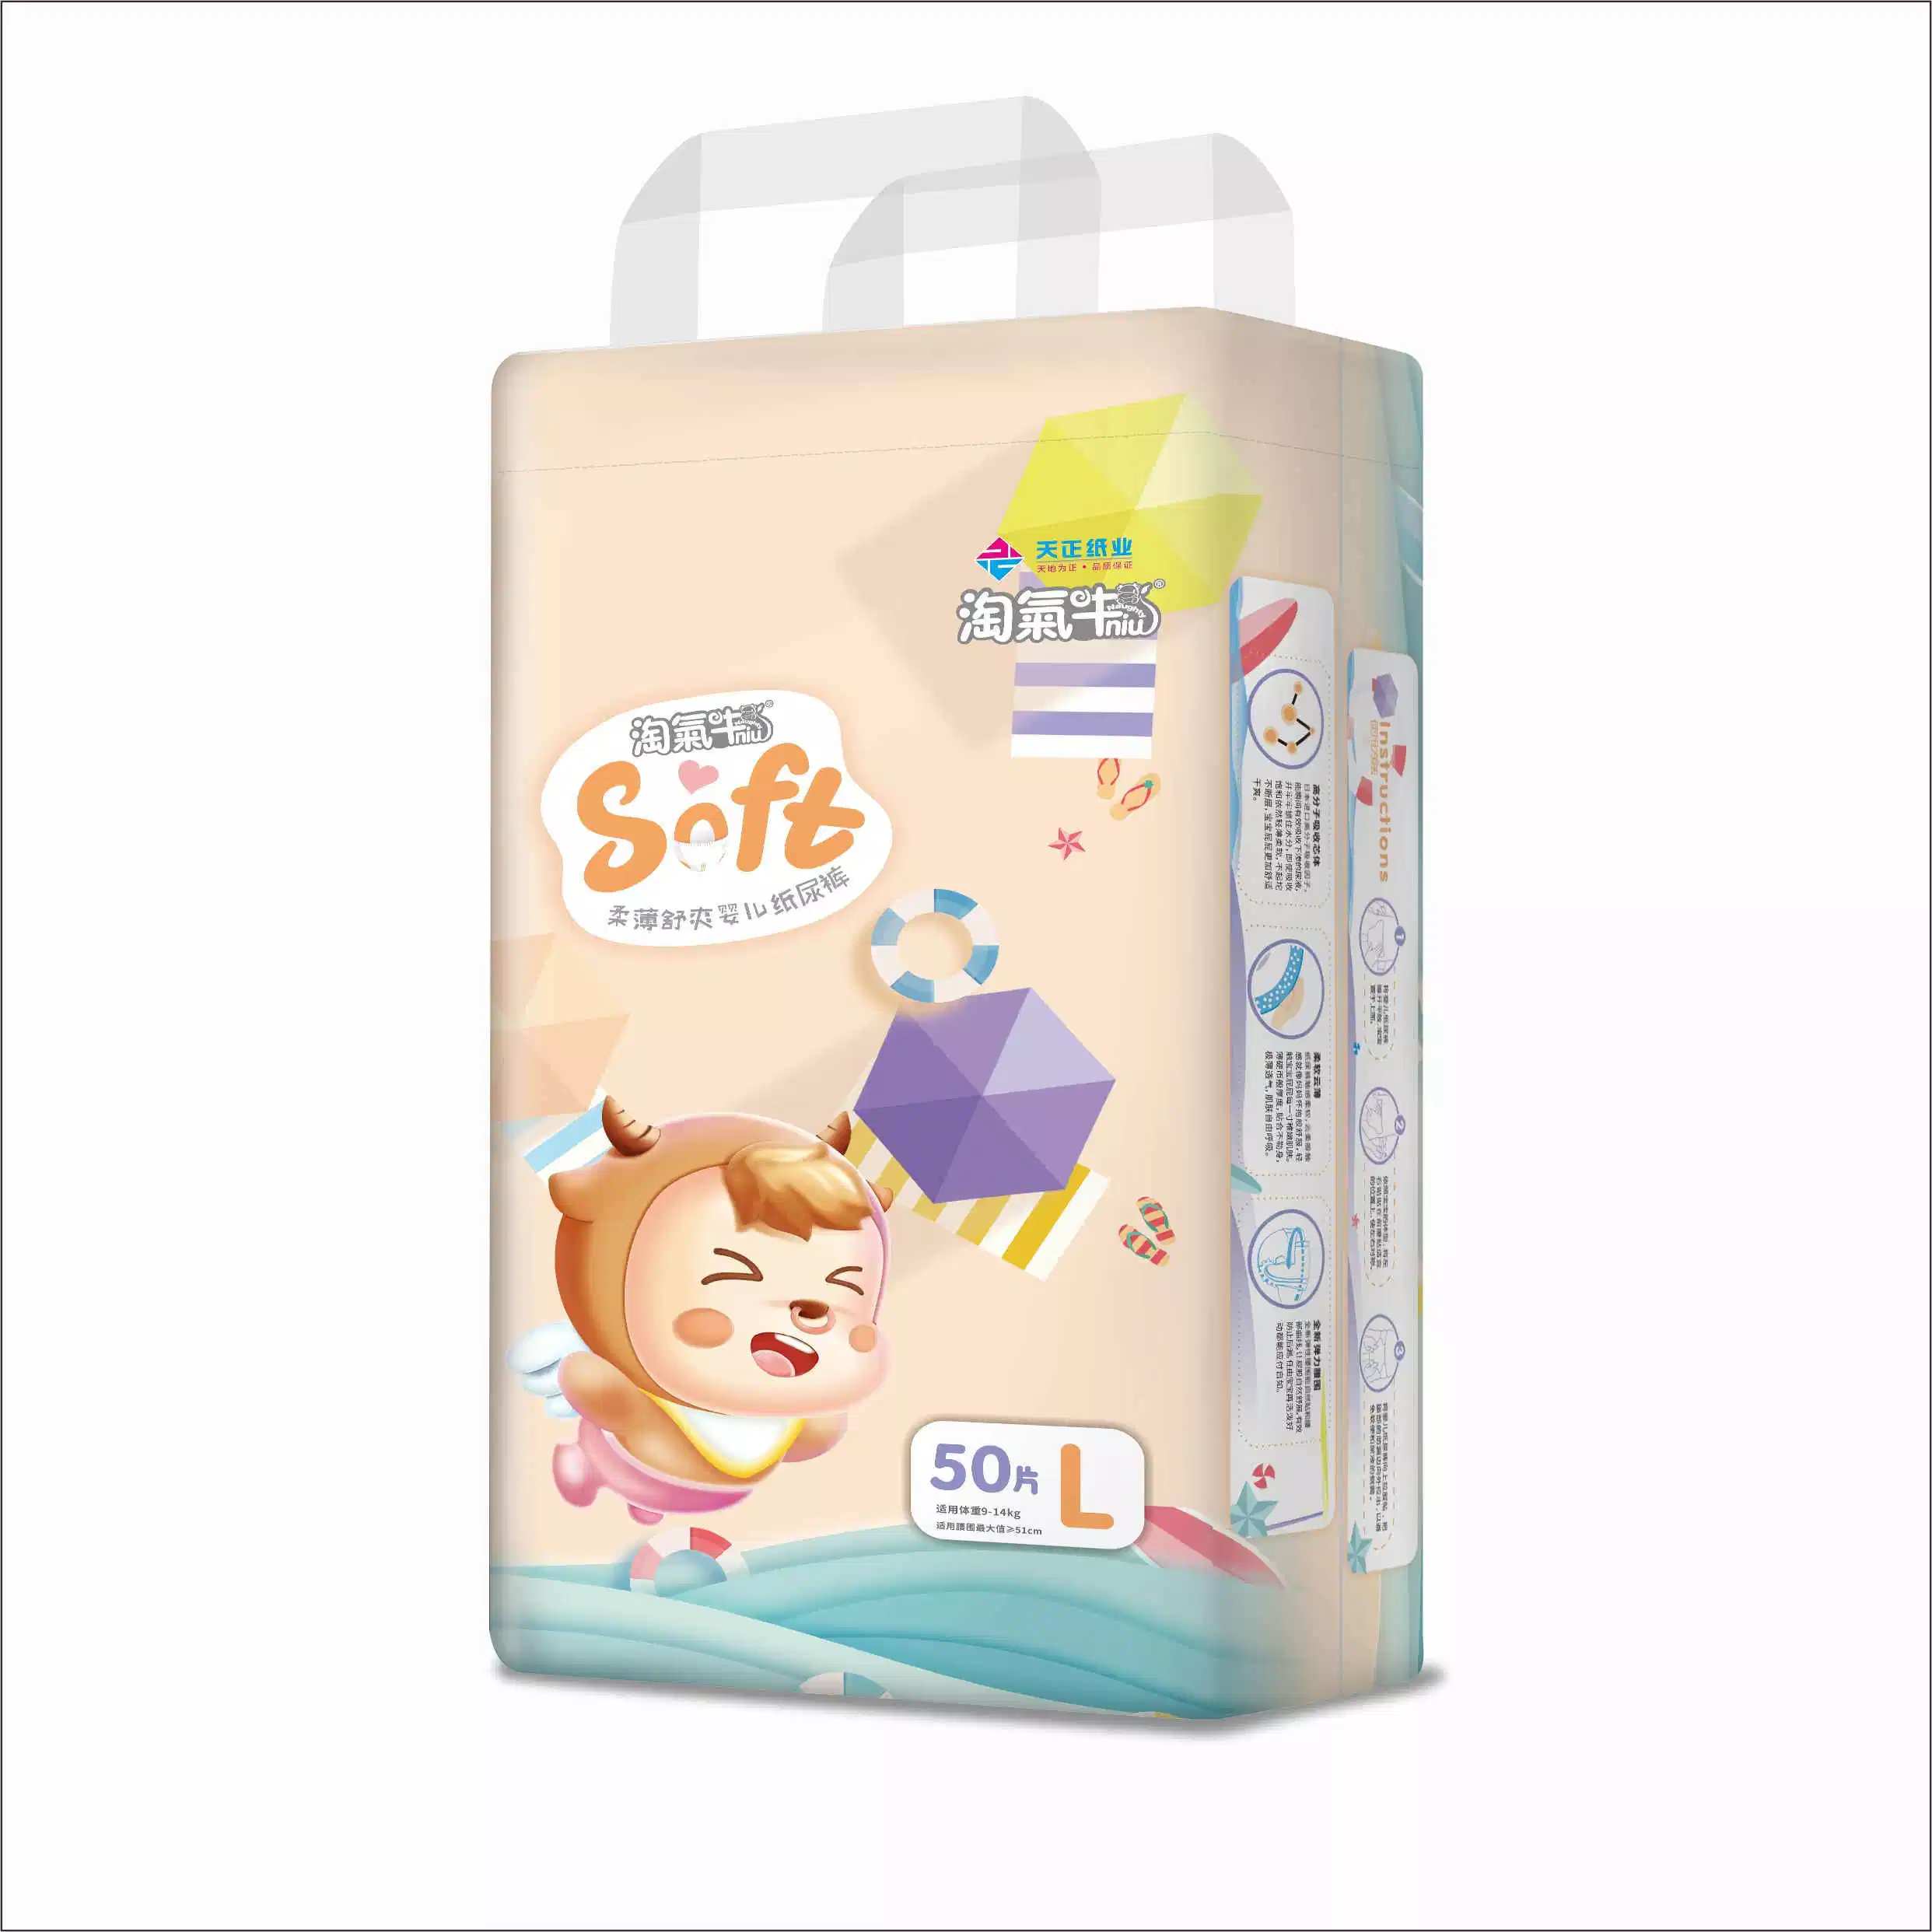 Baby Products Baby Care Baby Goods Baby Pull up Pants Baby Training Pants Disposable Baby Diaper